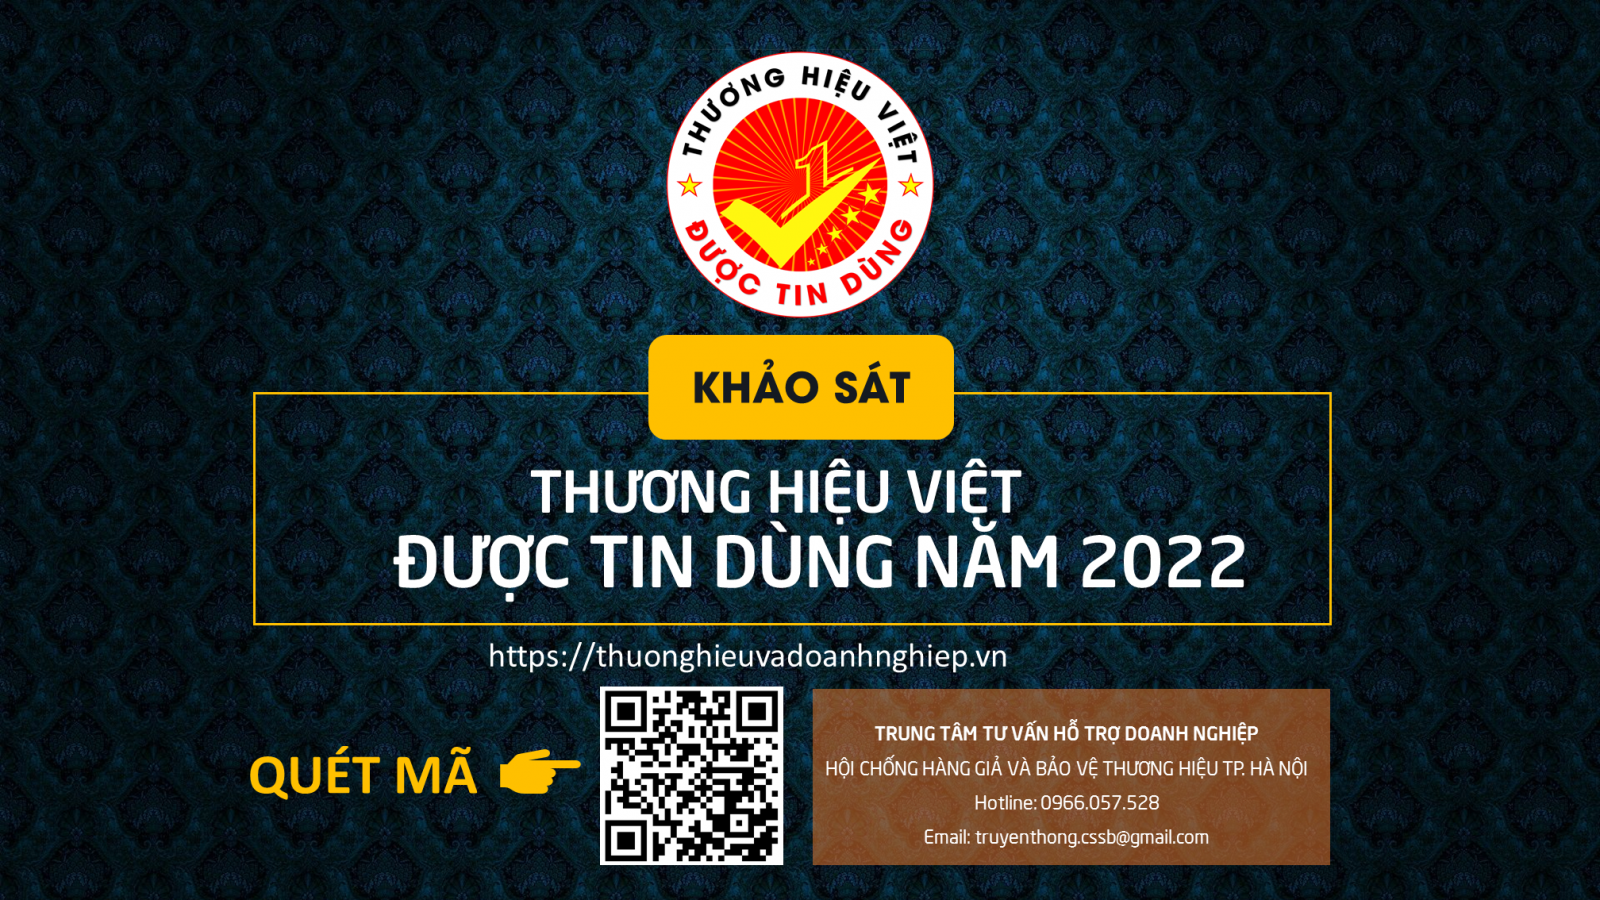 https://thuonghieuvadoanhnghiep.vn/images_upload/post/THVDTD/banner-thvdtd.png